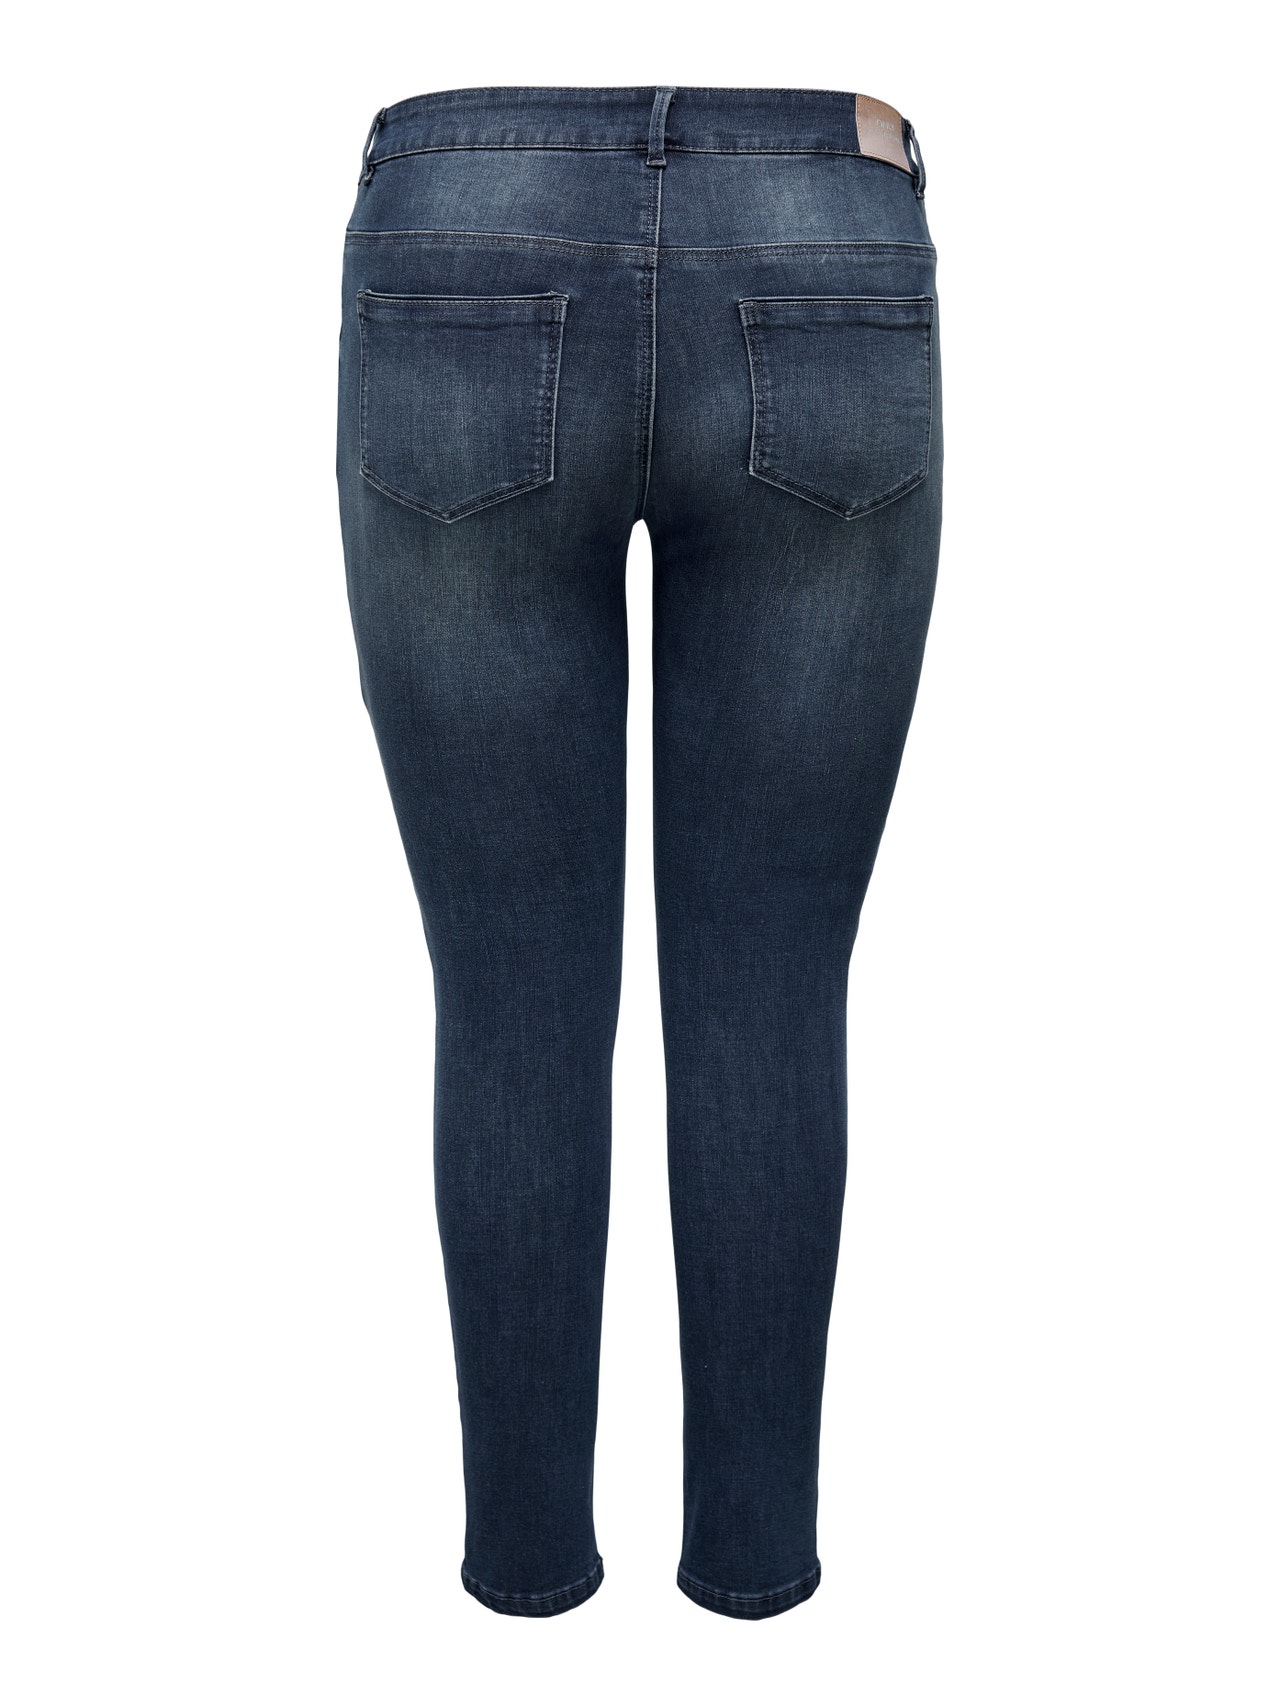 30% ONLY® Curvy fit reg jeans discount! CARSally with Skinny |